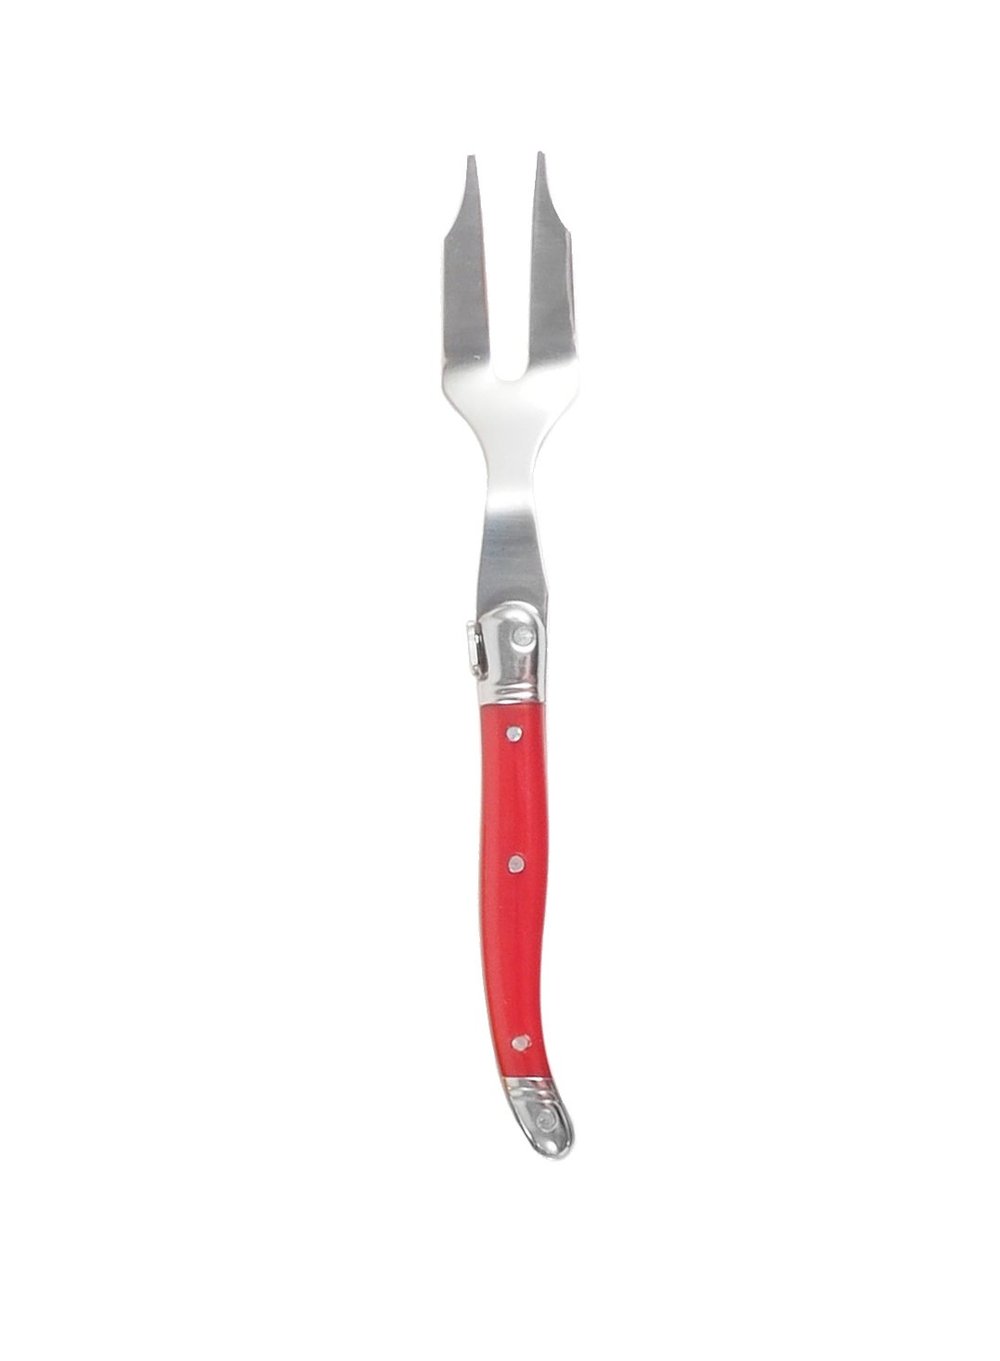 Fredericks and Mae - Cheese Knife Set - Duet Red/Blue/Yellow